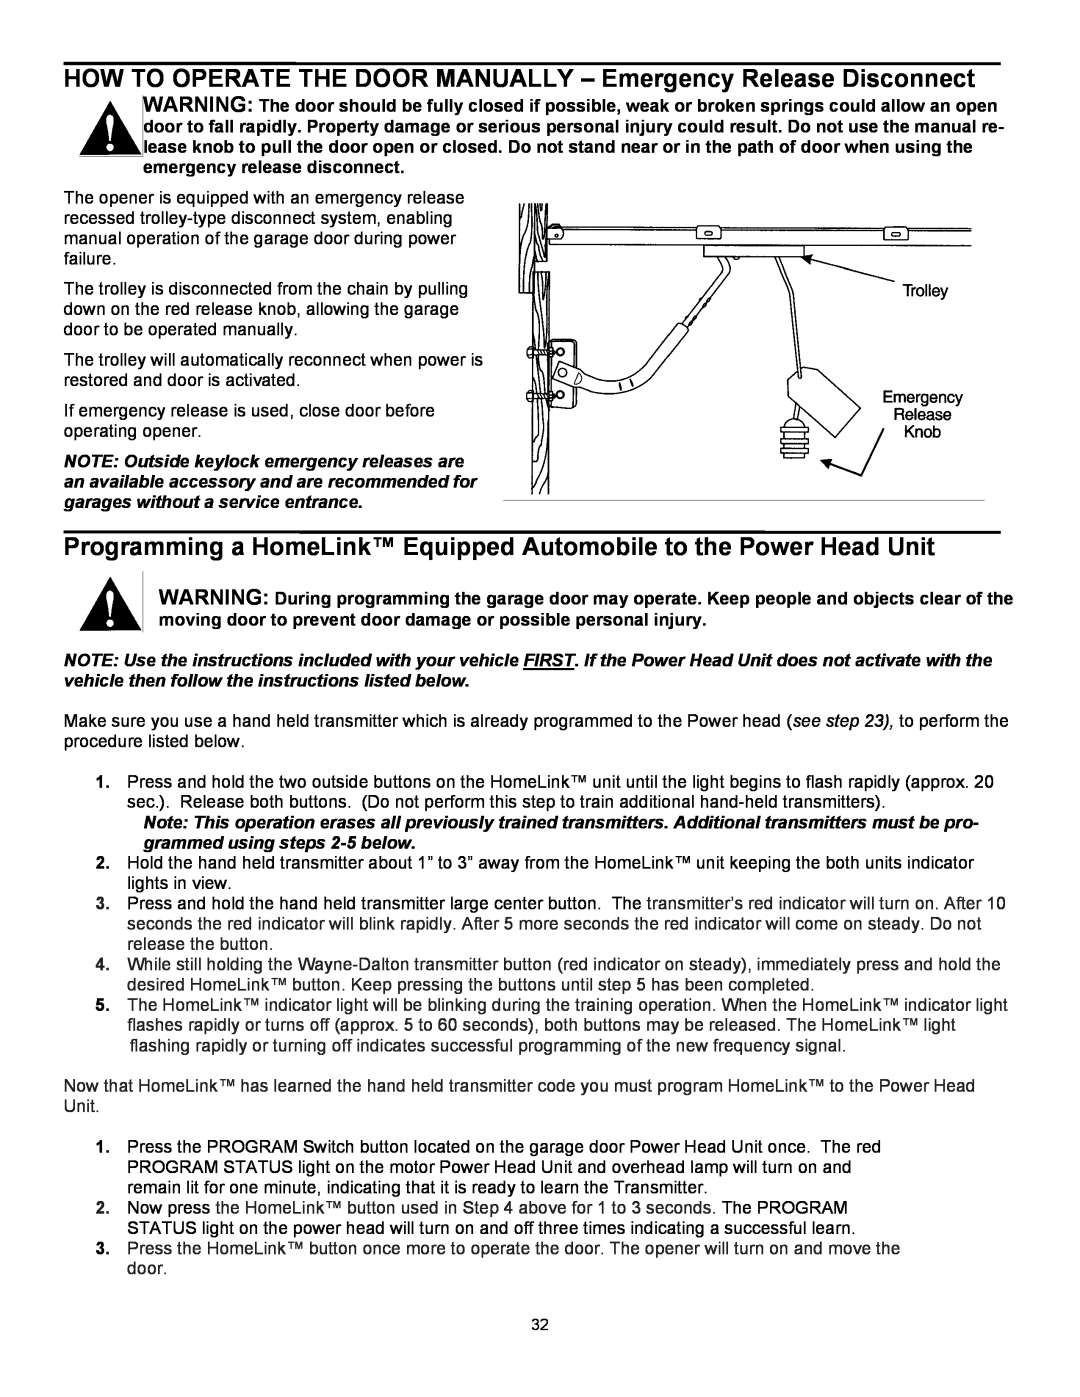 Wayne 3014, 3514, 3018DLX user manual HOW TO OPERATE THE DOOR MANUALLY - Emergency Release Disconnect 